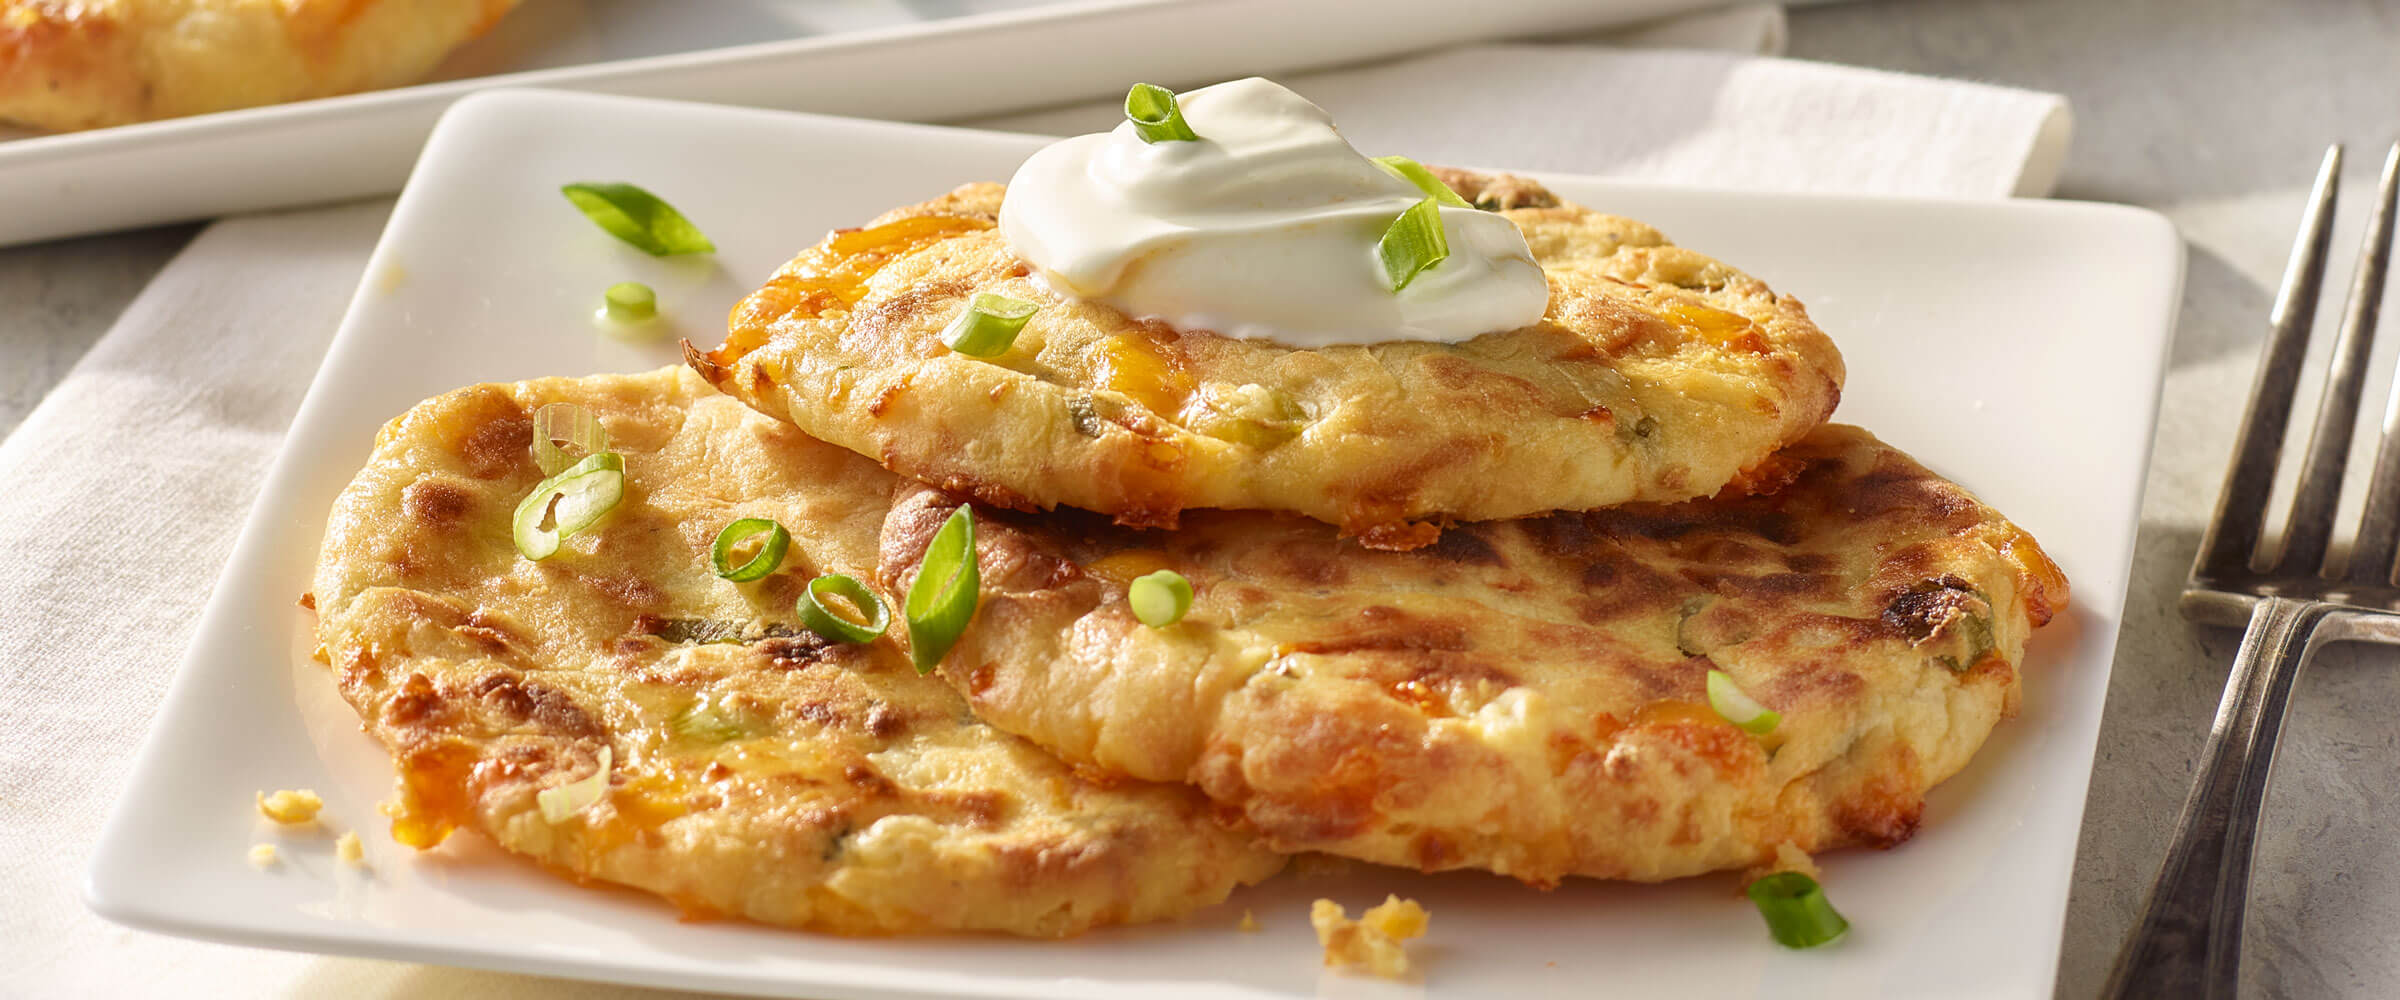 Air Fryer Mashed Potato Pancakes topped with sour cream and green onions on white plate